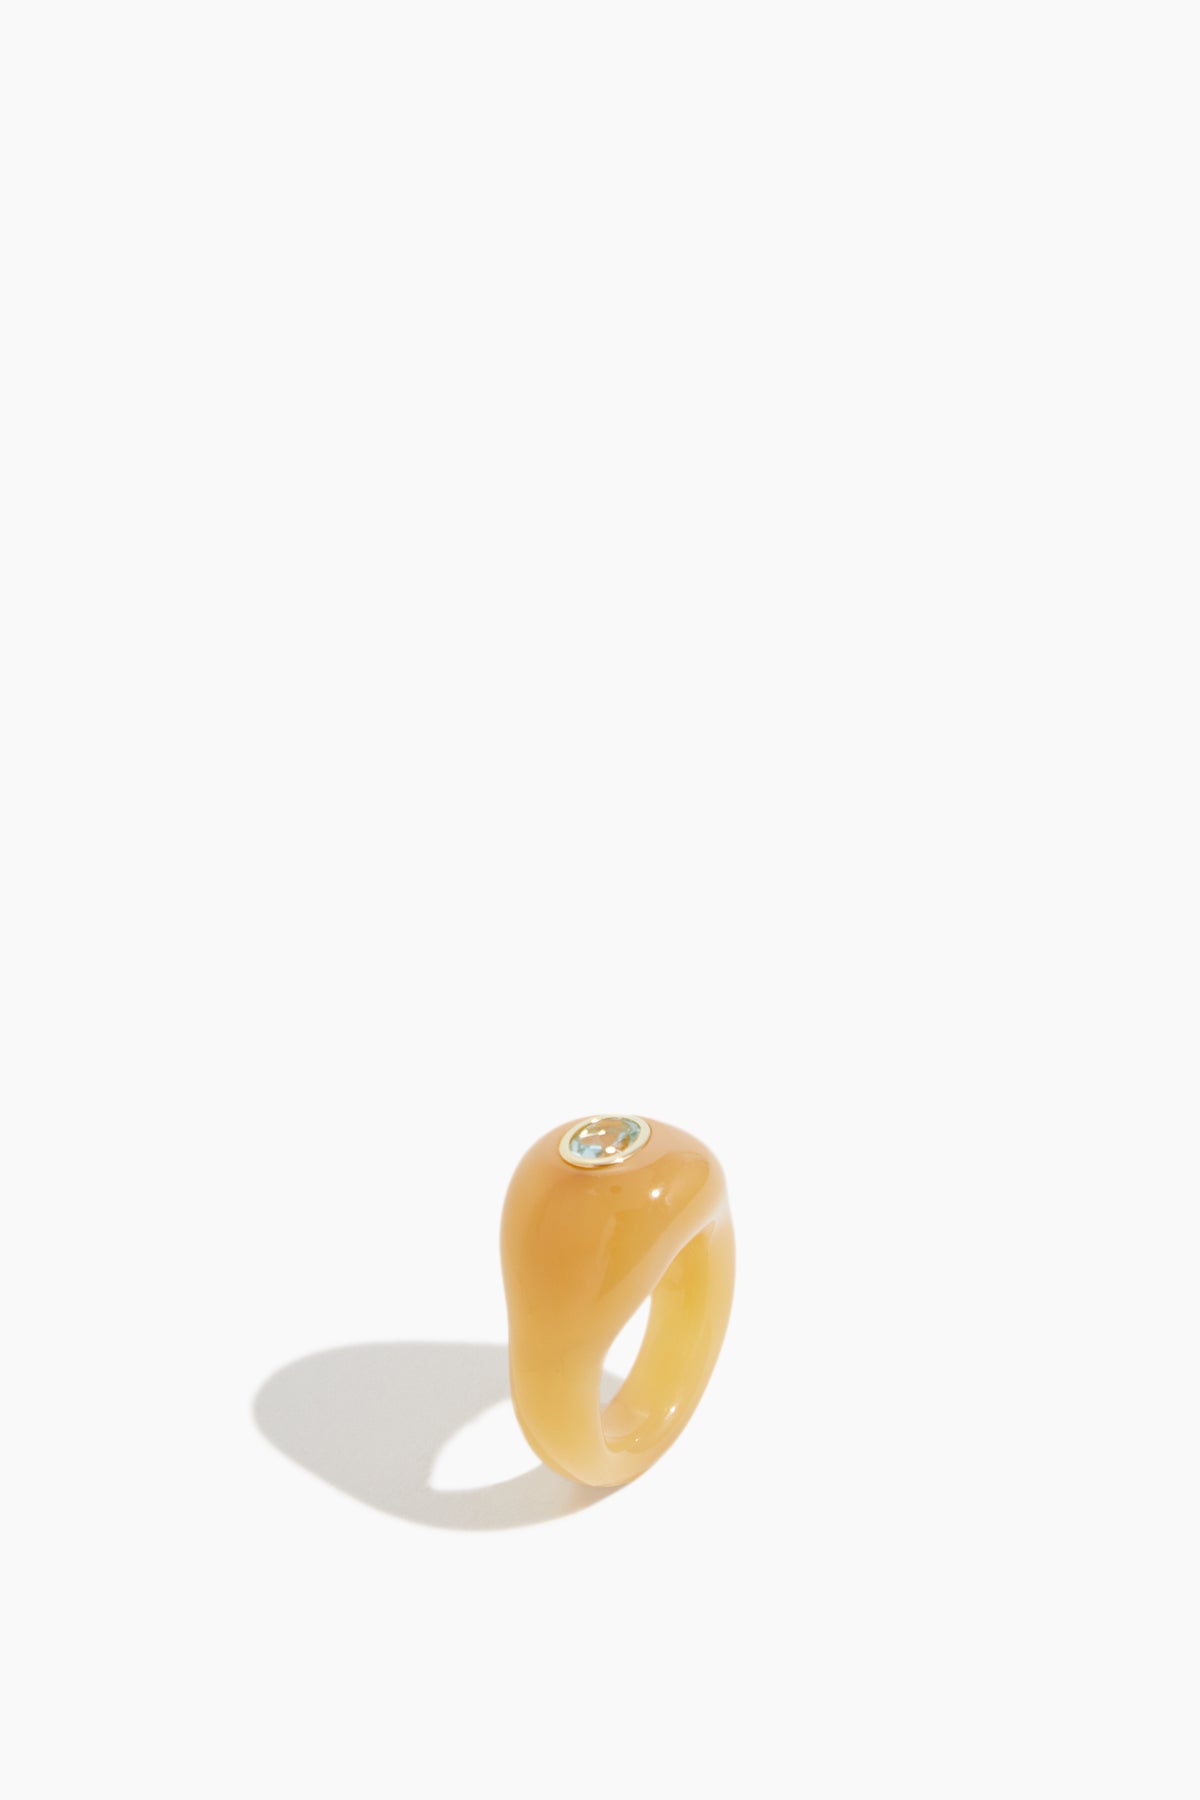 Lizzie Fortunato Rings Monument Ring in Dark Yellow Lizzie Fortunato Monument Ring in Dark Yellow